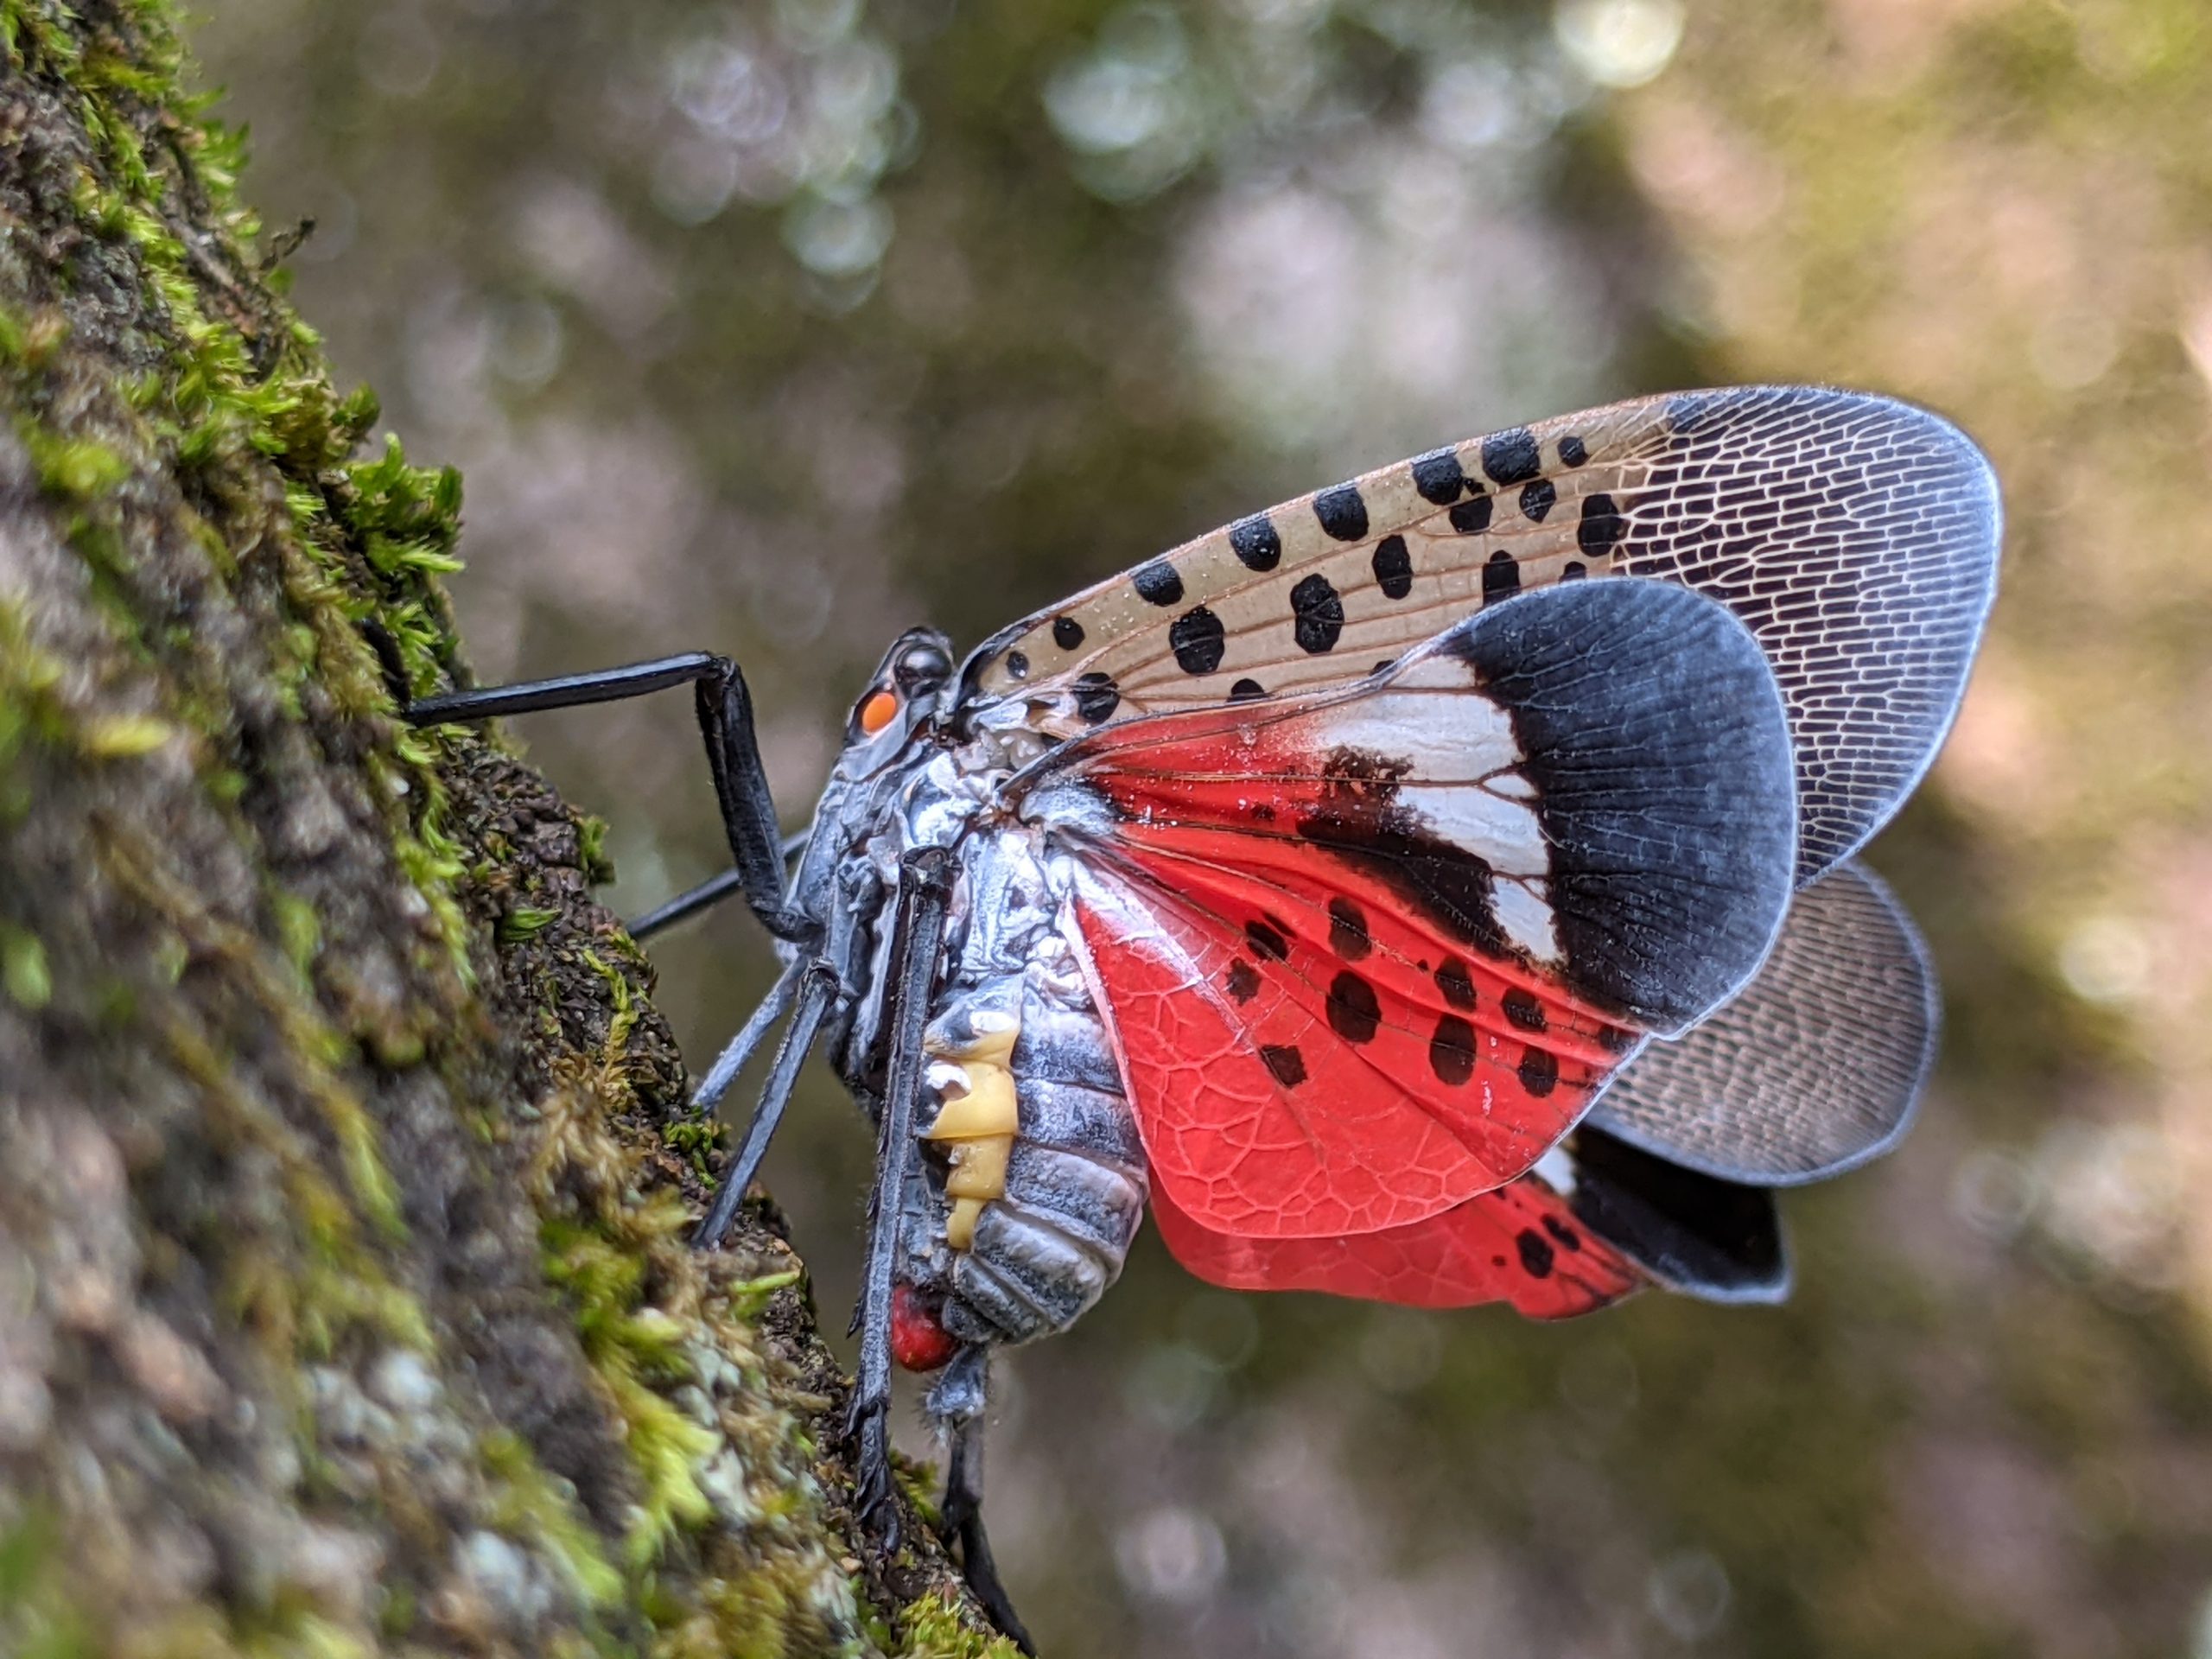 SLF Adult Wings Open MFPM 002 scaled - The Search for the Spotted Lanternfly